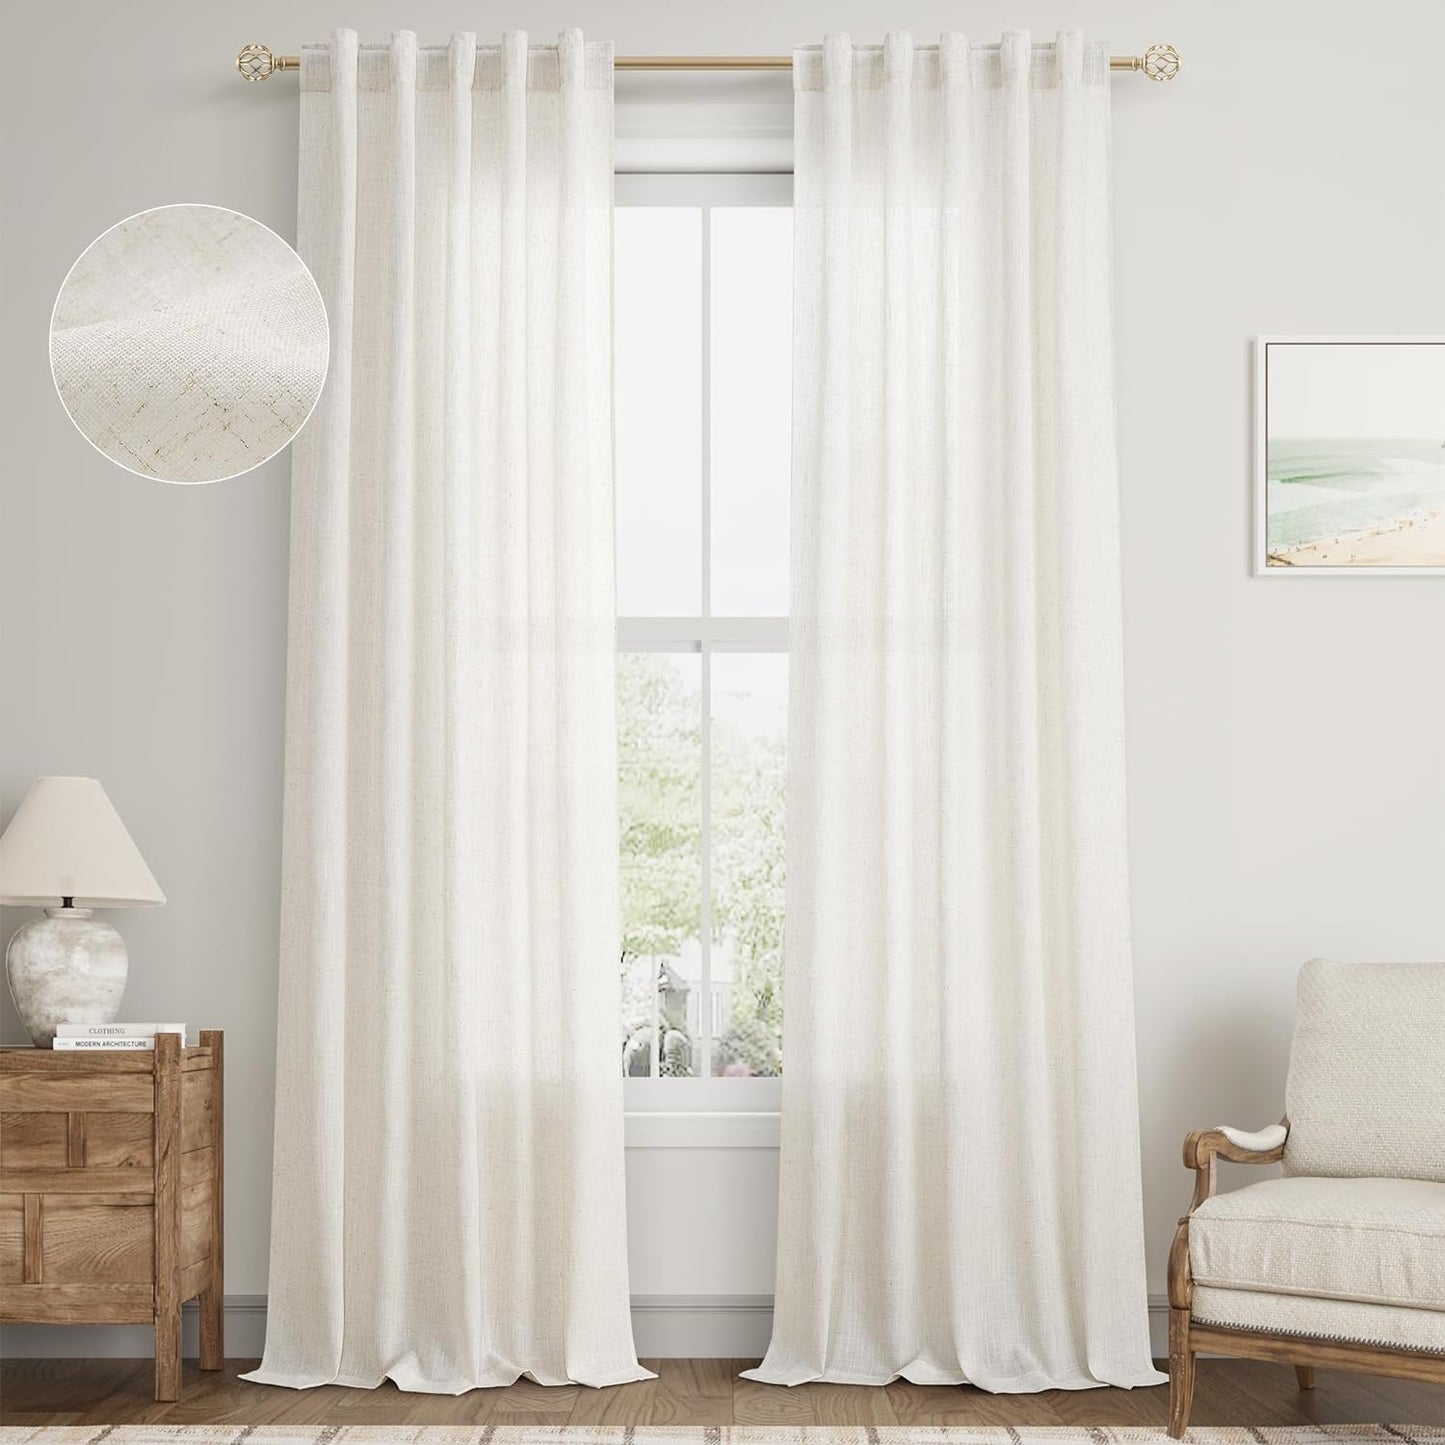 Natural Linen Sheer Curtains 84 Inch Long for Living Room Bedroom Back Tab Light Filtering Privacy Farmhouse Rod Pocket Ivory off White Neutral Drapes with Hooks 2 Panels Cream Beige  SPWIY Natural 40W X 108L Inch X 2 Panels 